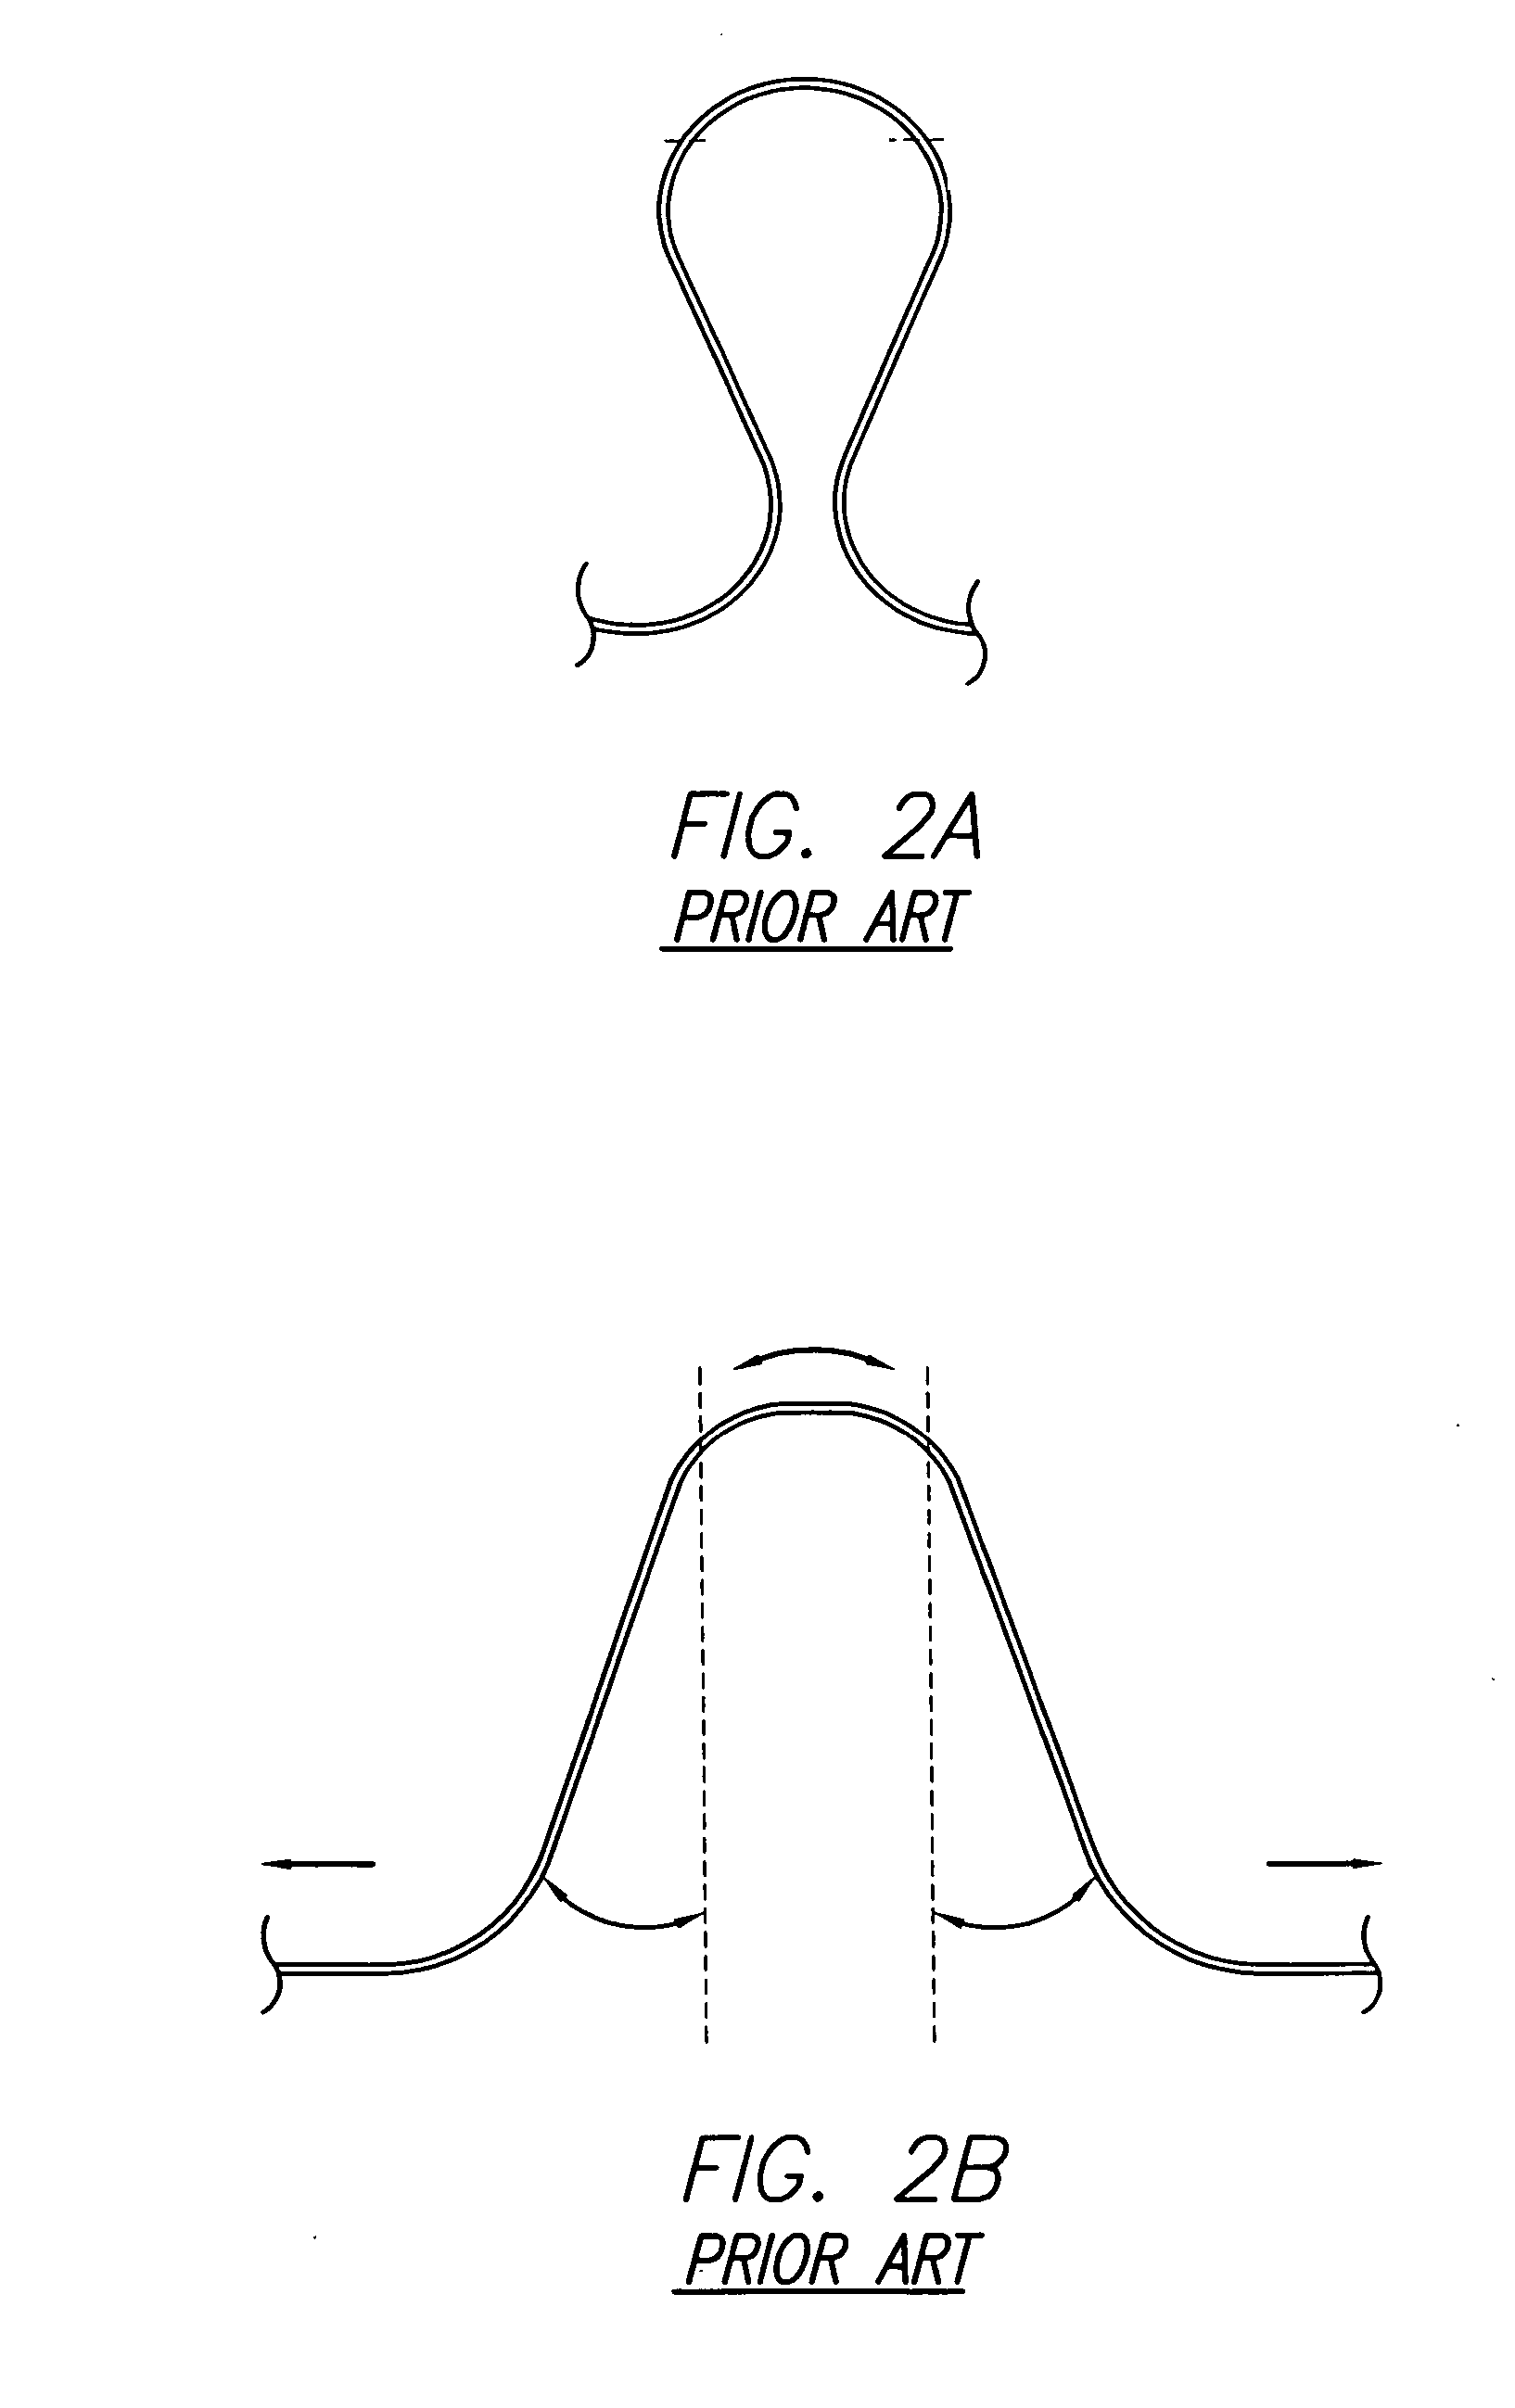 Cardiac harness having leadless electrodes for pacing and sensing therapy